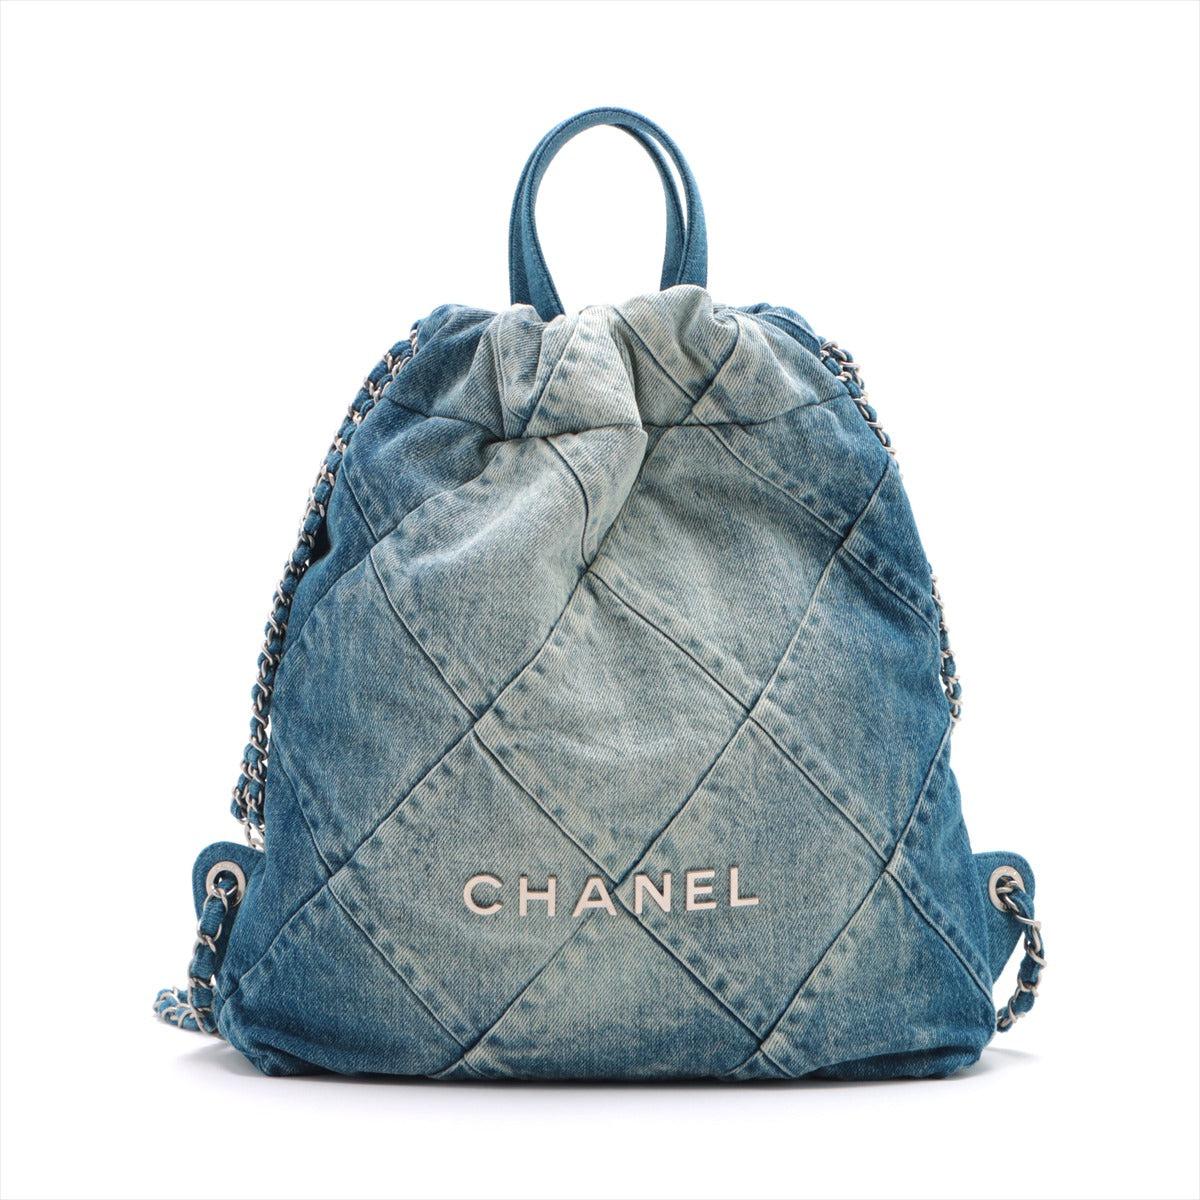 Chanel Chanel 22 Backpack Denim Chain backpack Blue Silver Metal fittings AS3859